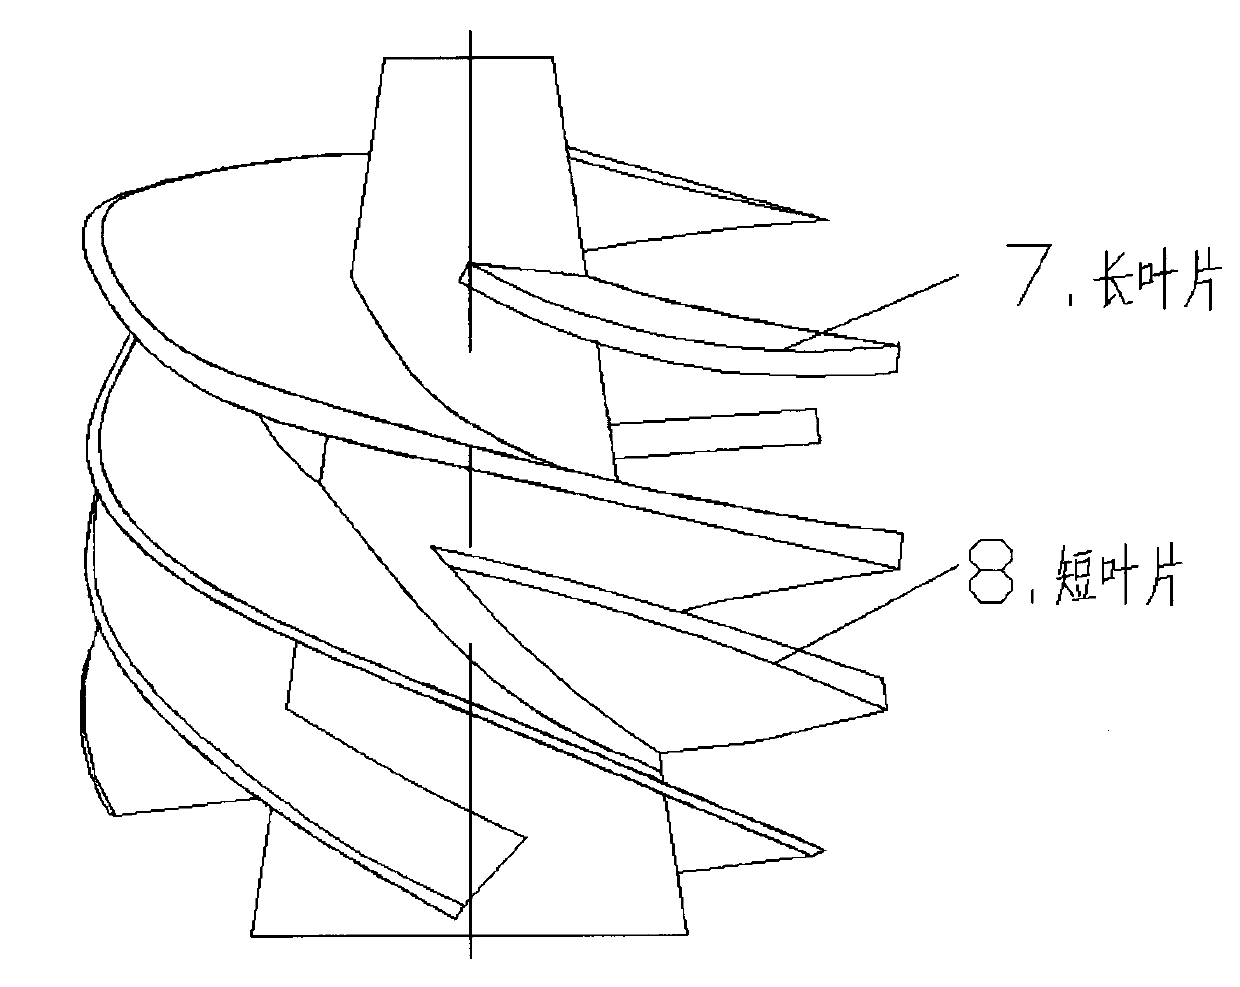 Structural design of pump with front preswirl plate of inducer having long and short vanes